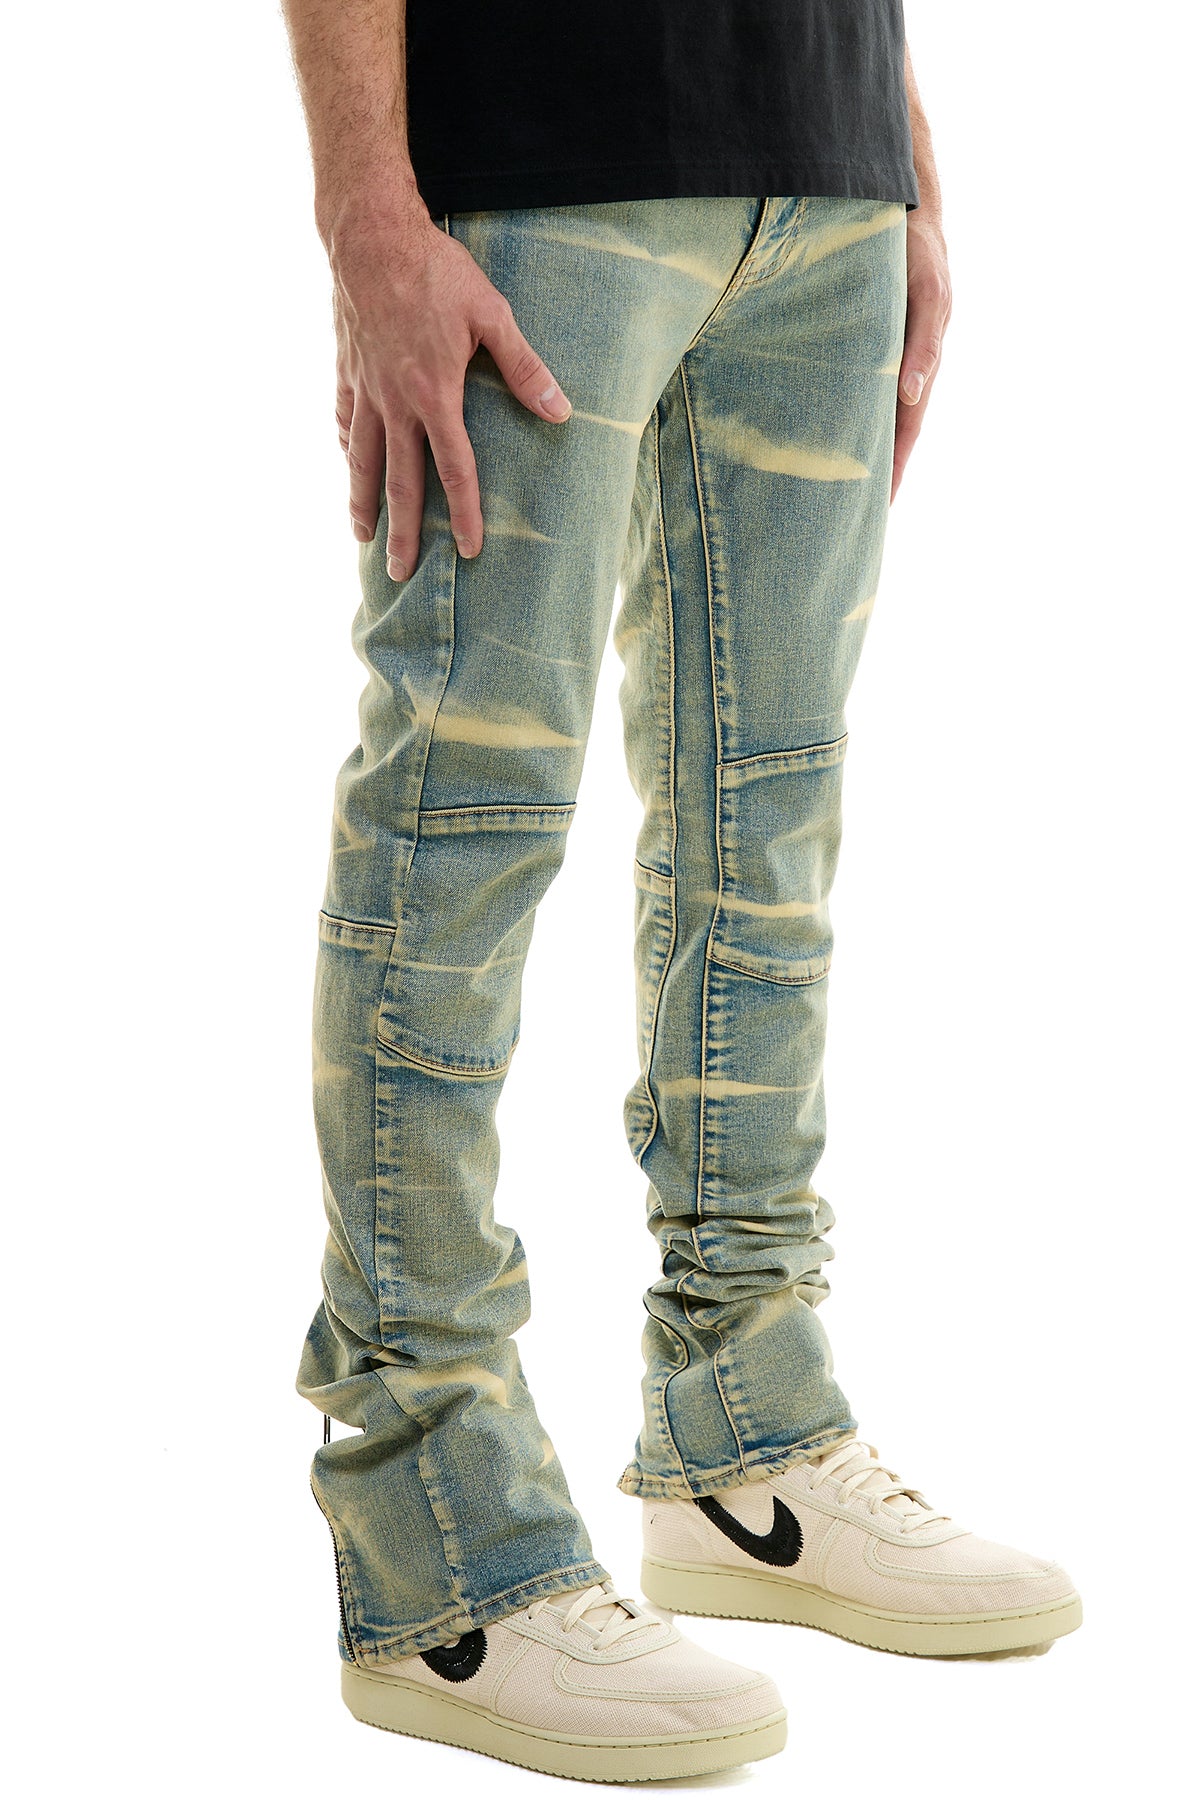 5-pocket skinny stacked jeans in stretch denim  Long zippers in back of bottom parts of pants w/ *backing inside